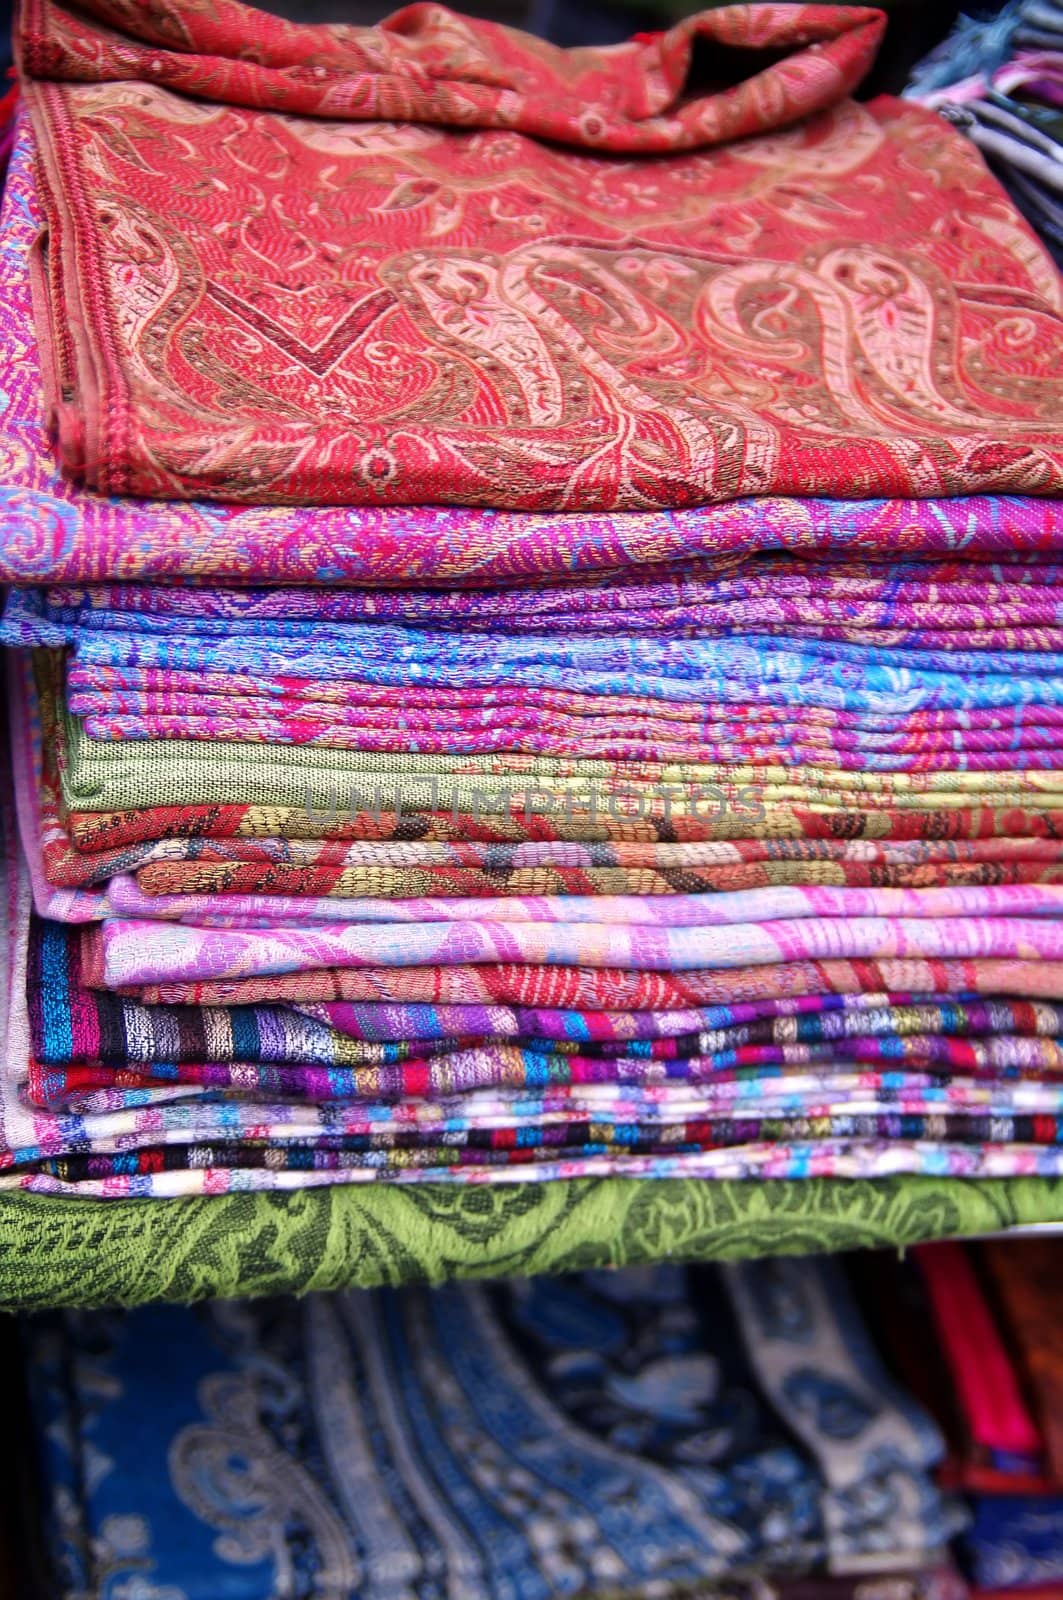 Number of colorful scarves put in a pile